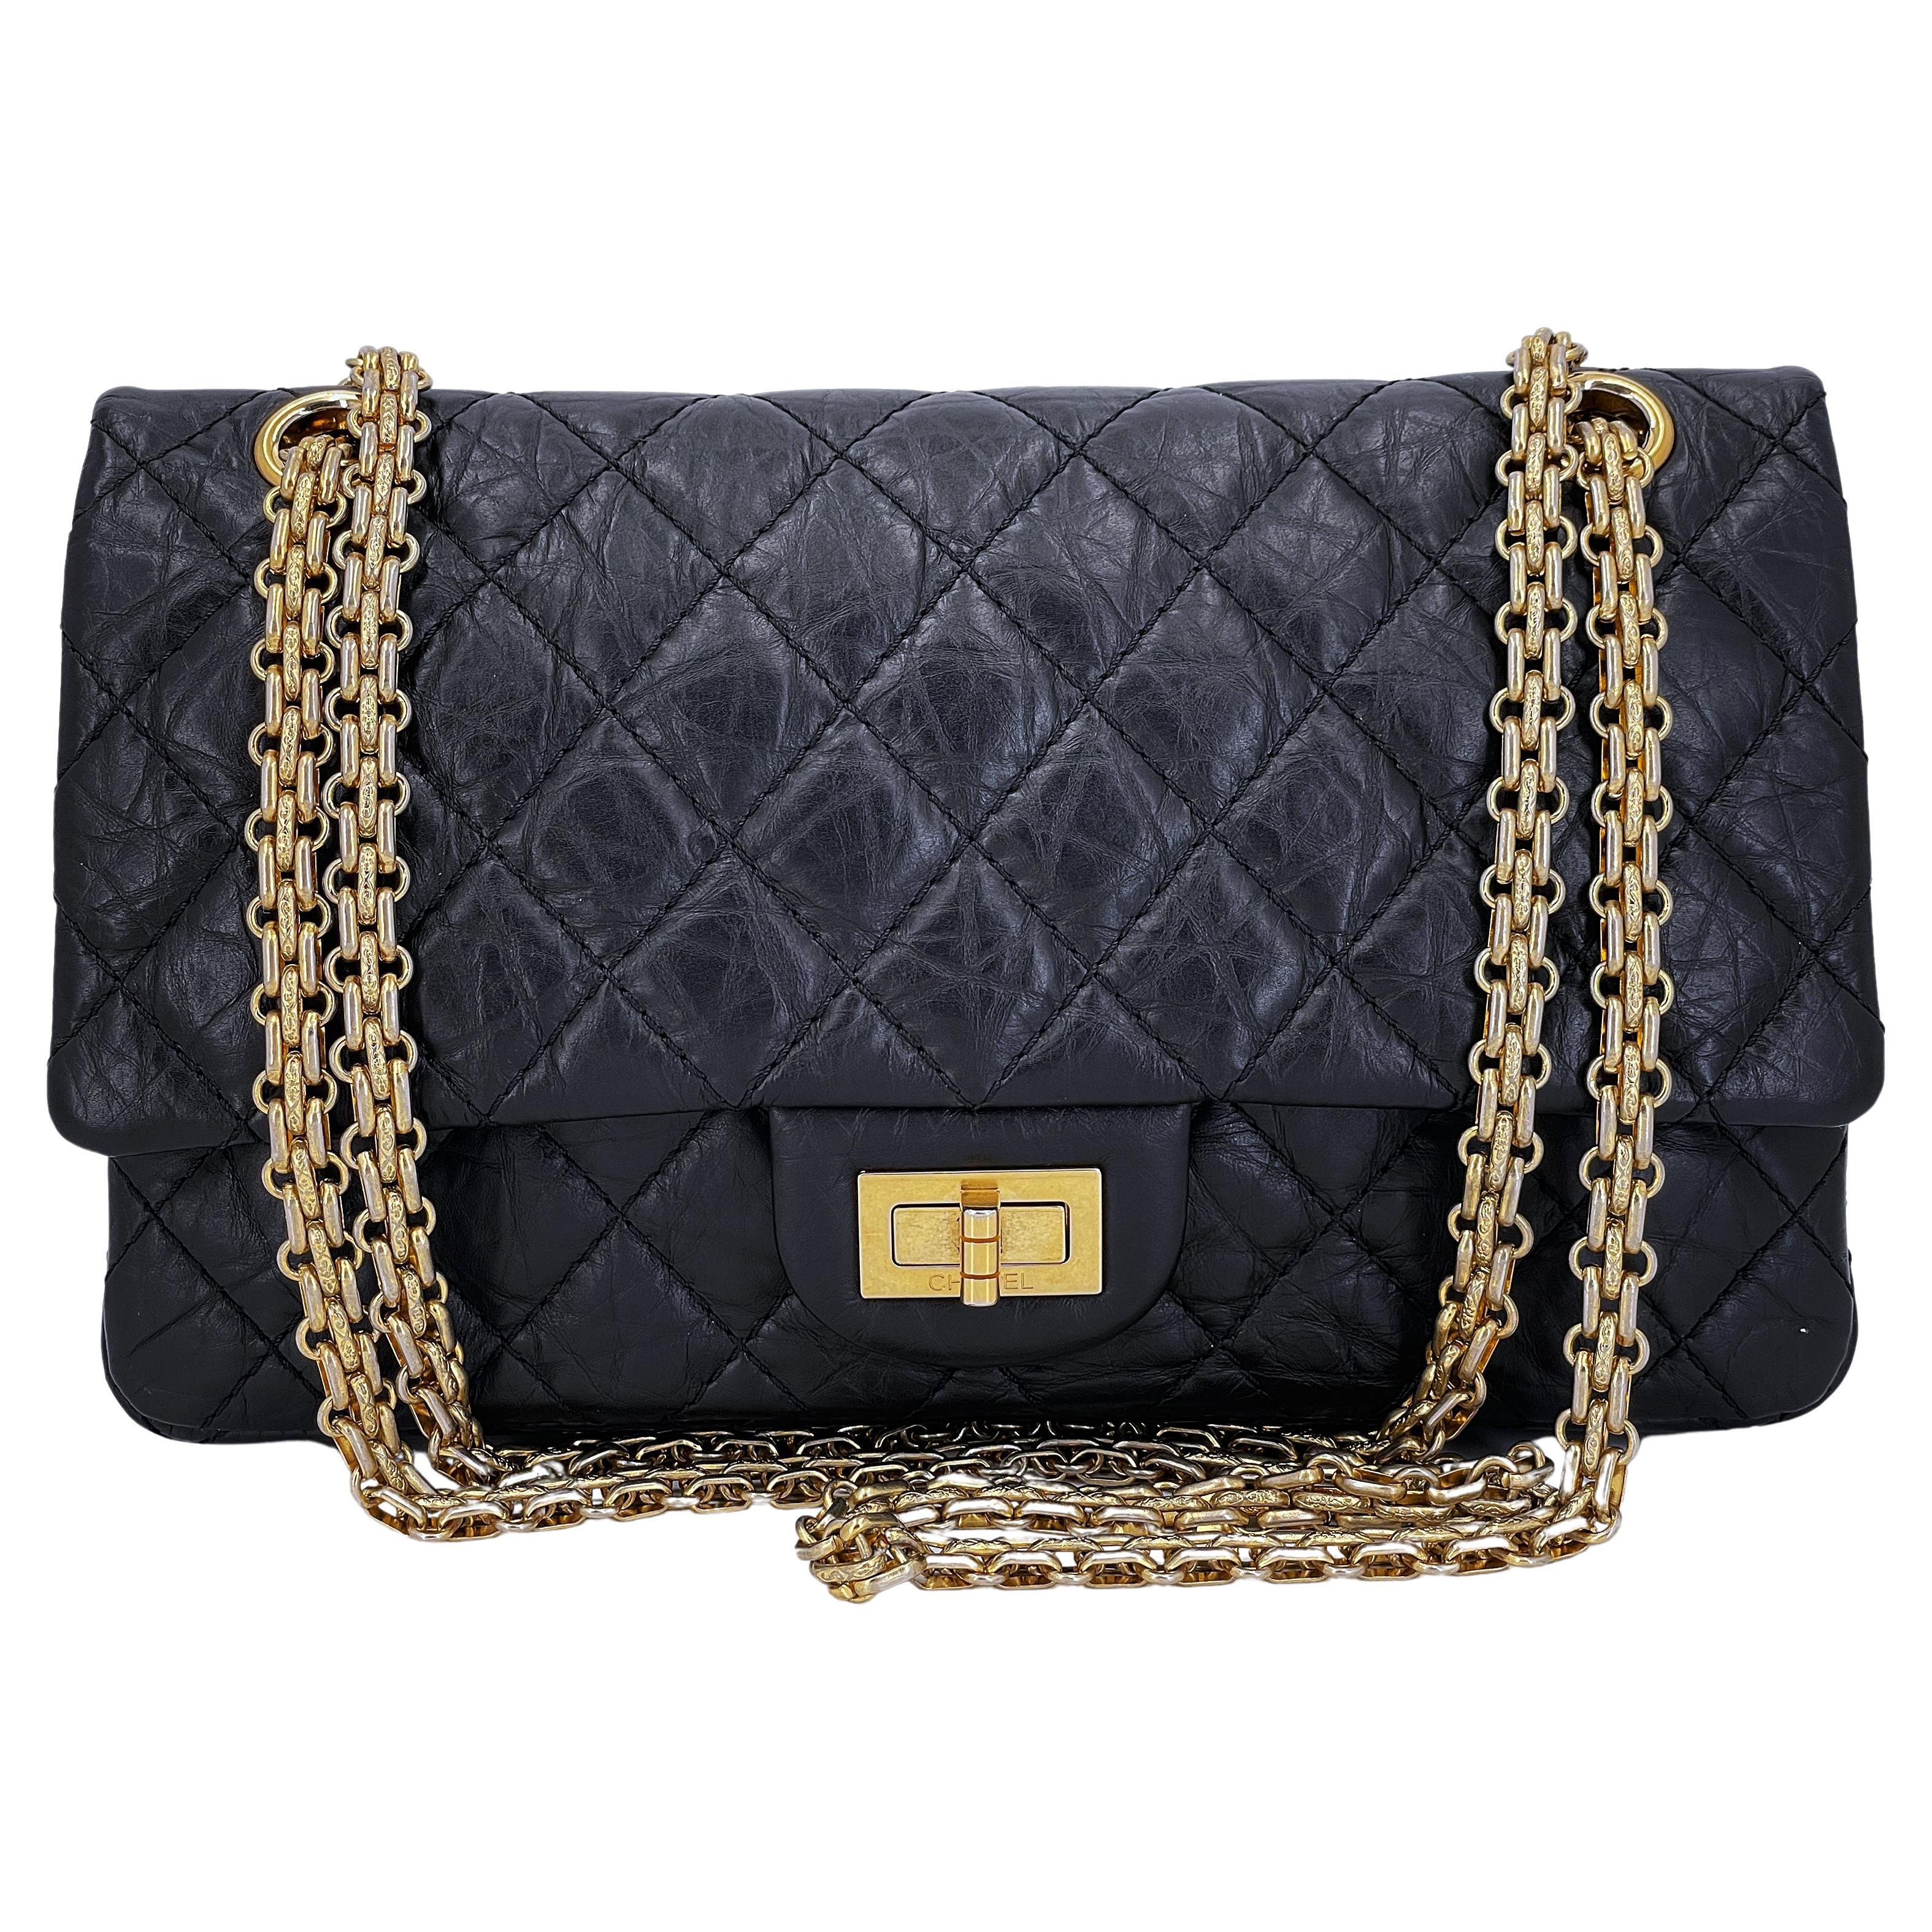 Chanel - Designer Biography and Price History on 1stDibs